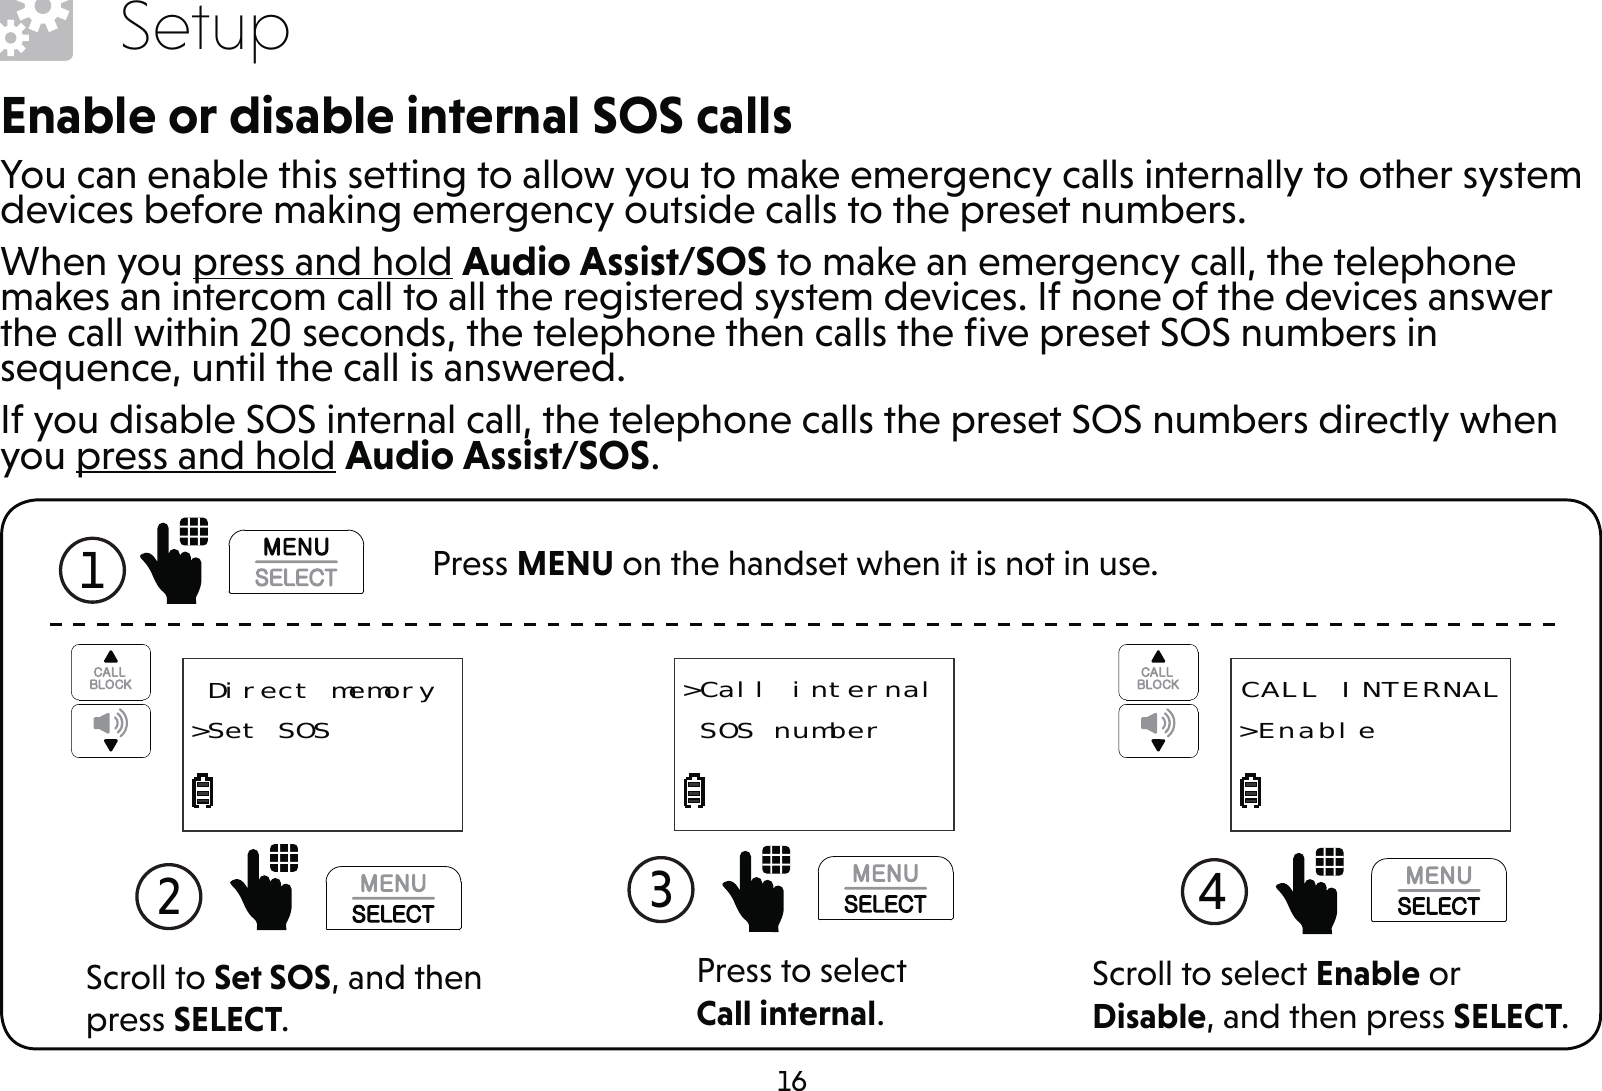 16SetupEnable or disable internal SOS callsYou can enable this setting to allow you to make emergency calls internally to other system devices before making emergency outside calls to the preset numbers.When you press and hold Audio Assist/SOS to make an emergency call, the telephone makes an intercom call to all the registered system devices. If none of the devices answer the call within 20 seconds, the telephone then calls the ﬁve preset SOS numbers in sequence, until the call is answered.If you disable SOS internal call, the telephone calls the preset SOS numbers directly when you press and hold Audio Assist/SOS.Press to select Call internal.3 &gt;Call internal SOS numberScroll to select Enable or Disable, and then press SELECT.4  CALL INTERNAL&gt;EnableScroll to Set SOS, and then press SELECT.2   Direct memory&gt;Set SOS1  Press MENU on the handset when it is not in use.